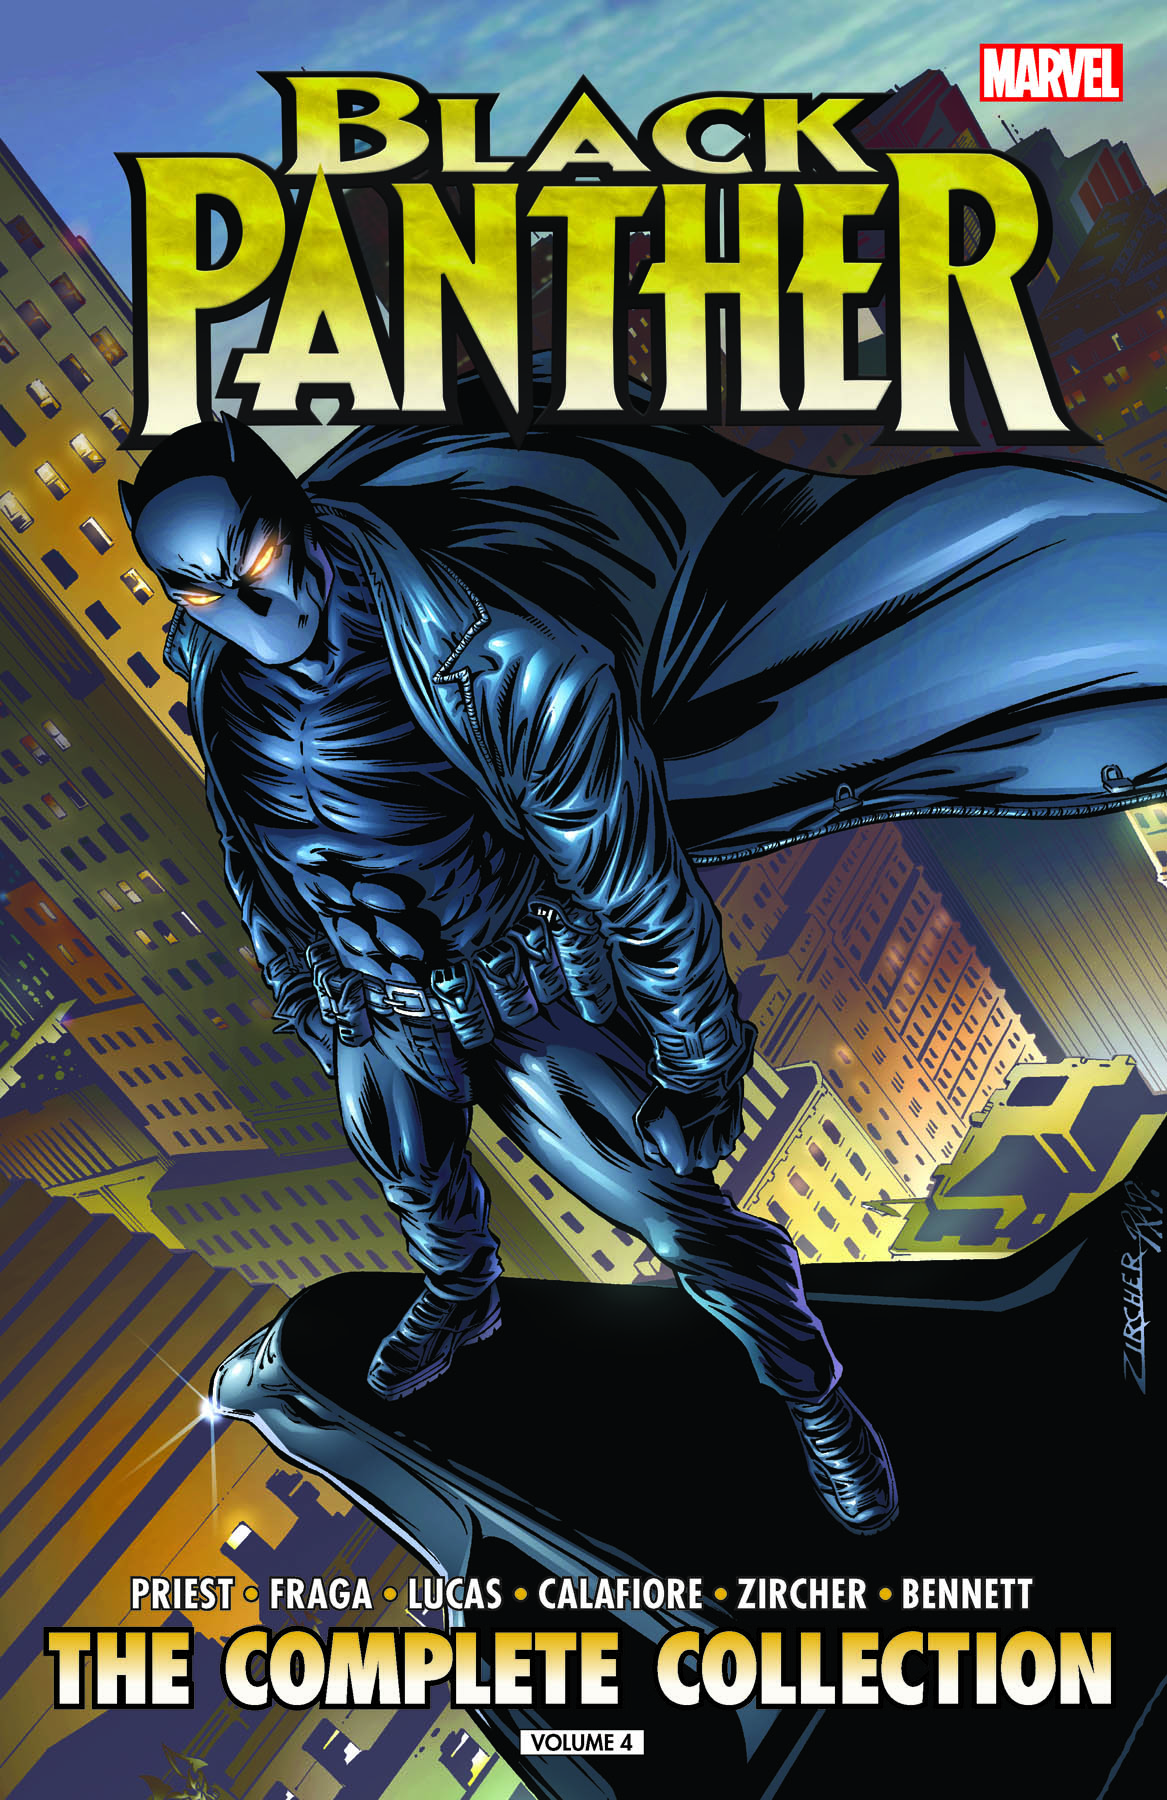 Black Panther by Christopher Priest: The Complete Collection Vol. 4 (Trade Paperback)